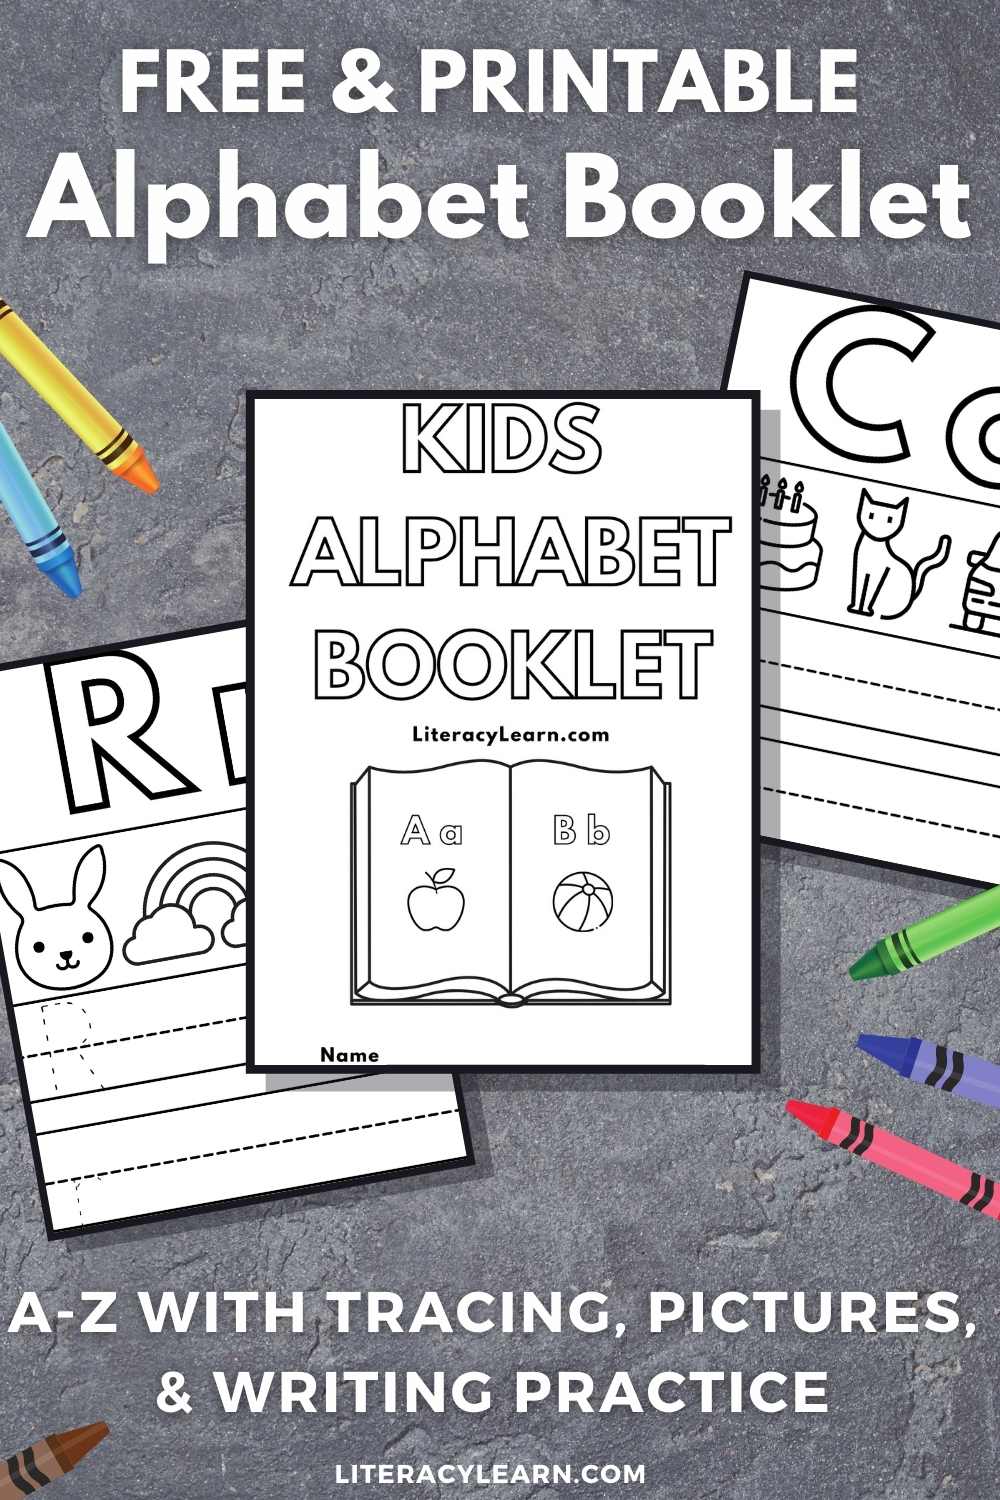 Three pages from the alphabet booklet with the words "Free and Printable Alphabet Booklet" for Pinterest. 